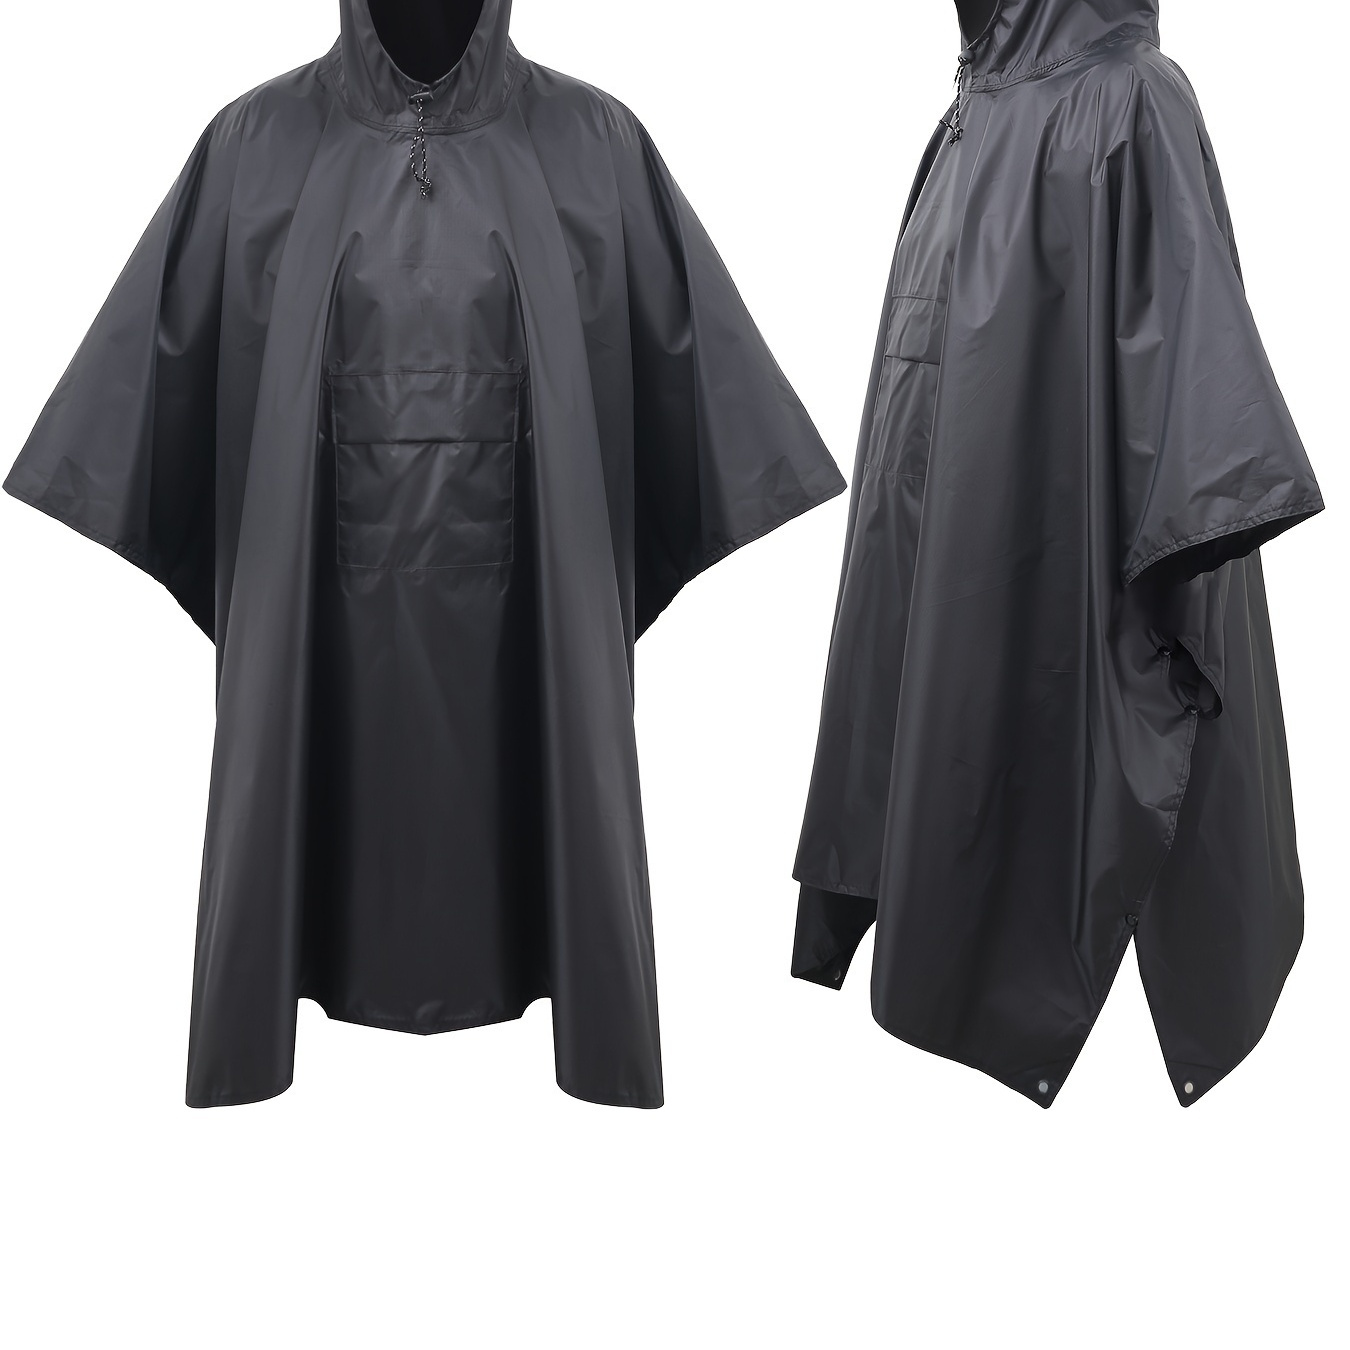 

Hooded Rain Poncho For Adult With Pocket, Waterproof Lightweight Unisex Raincoat For Hiking Camping Emergency